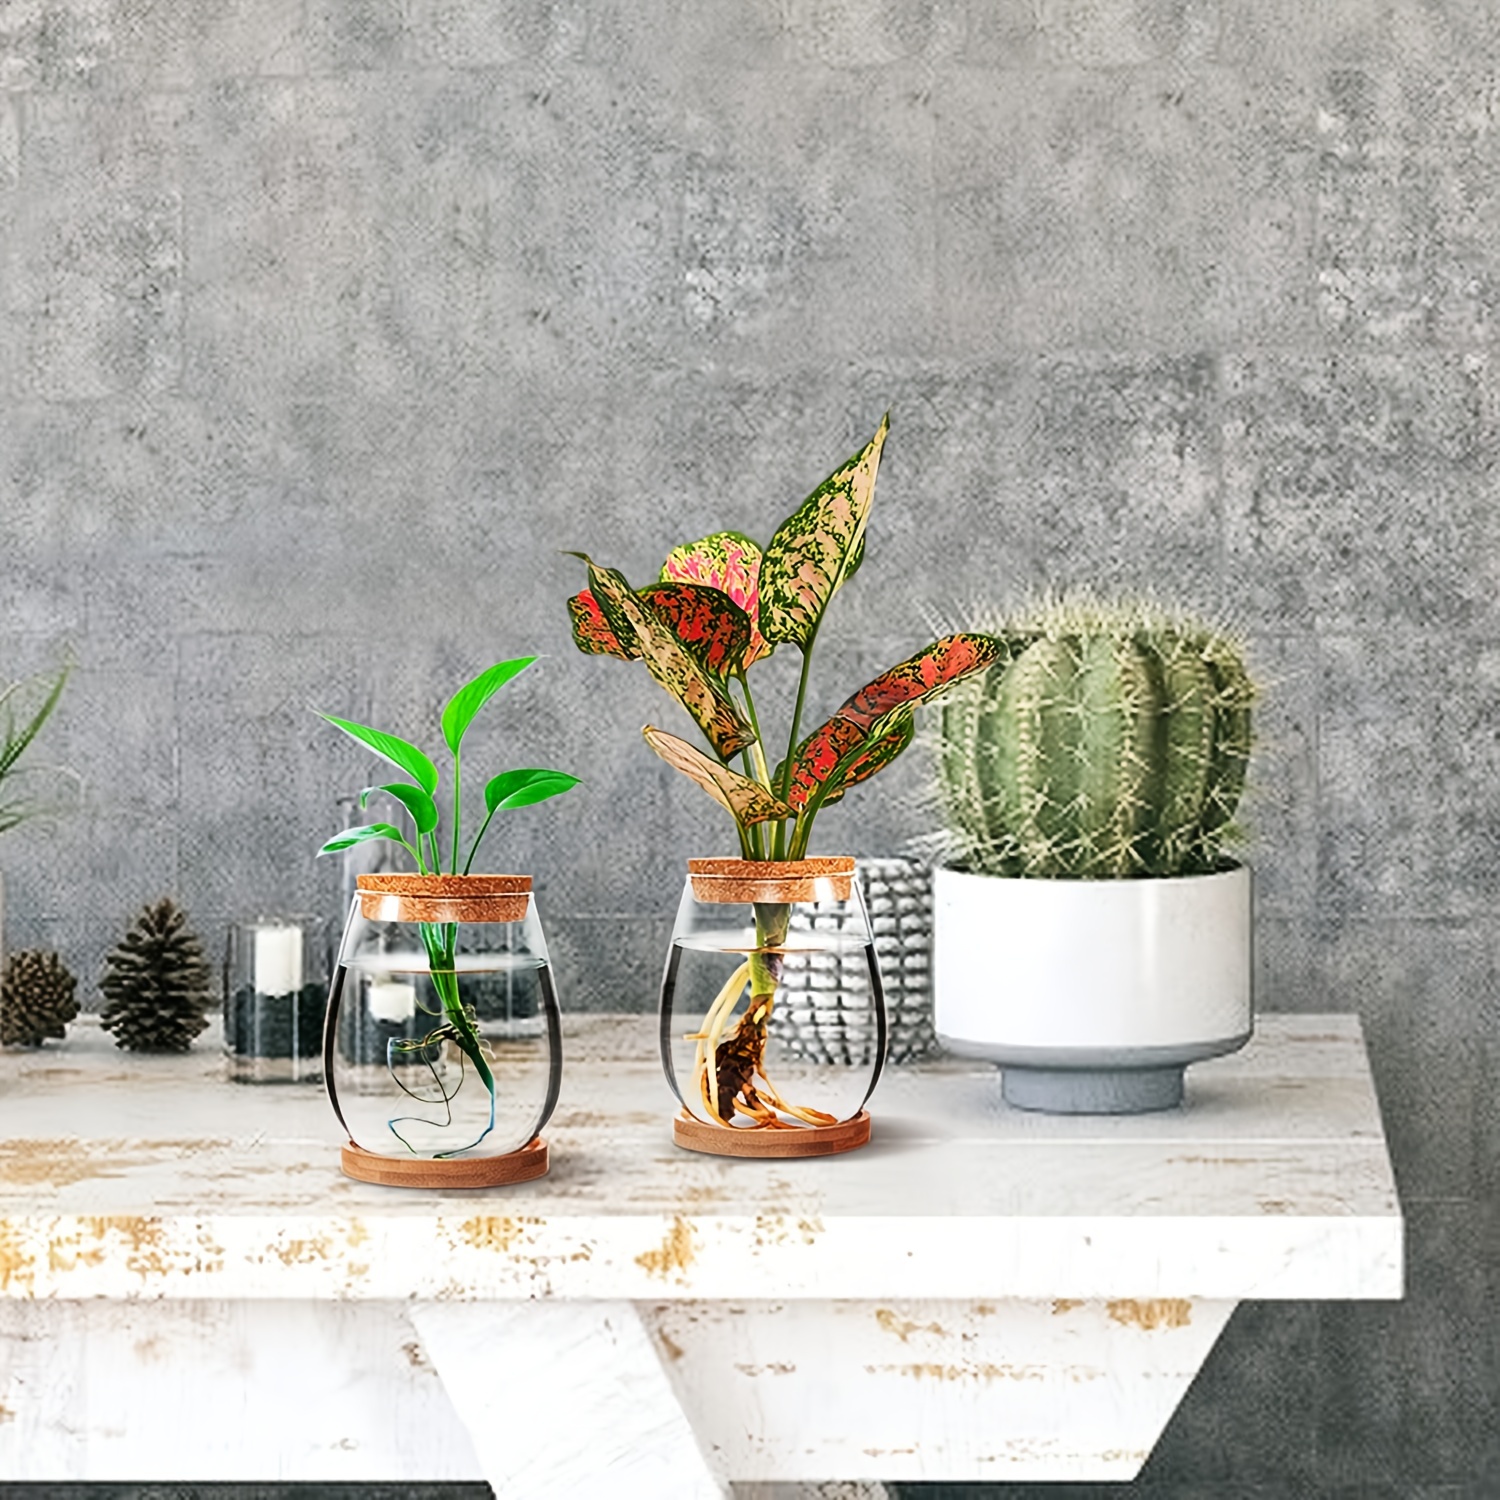 10 Stylish Propagation Vases for Growing New Plants